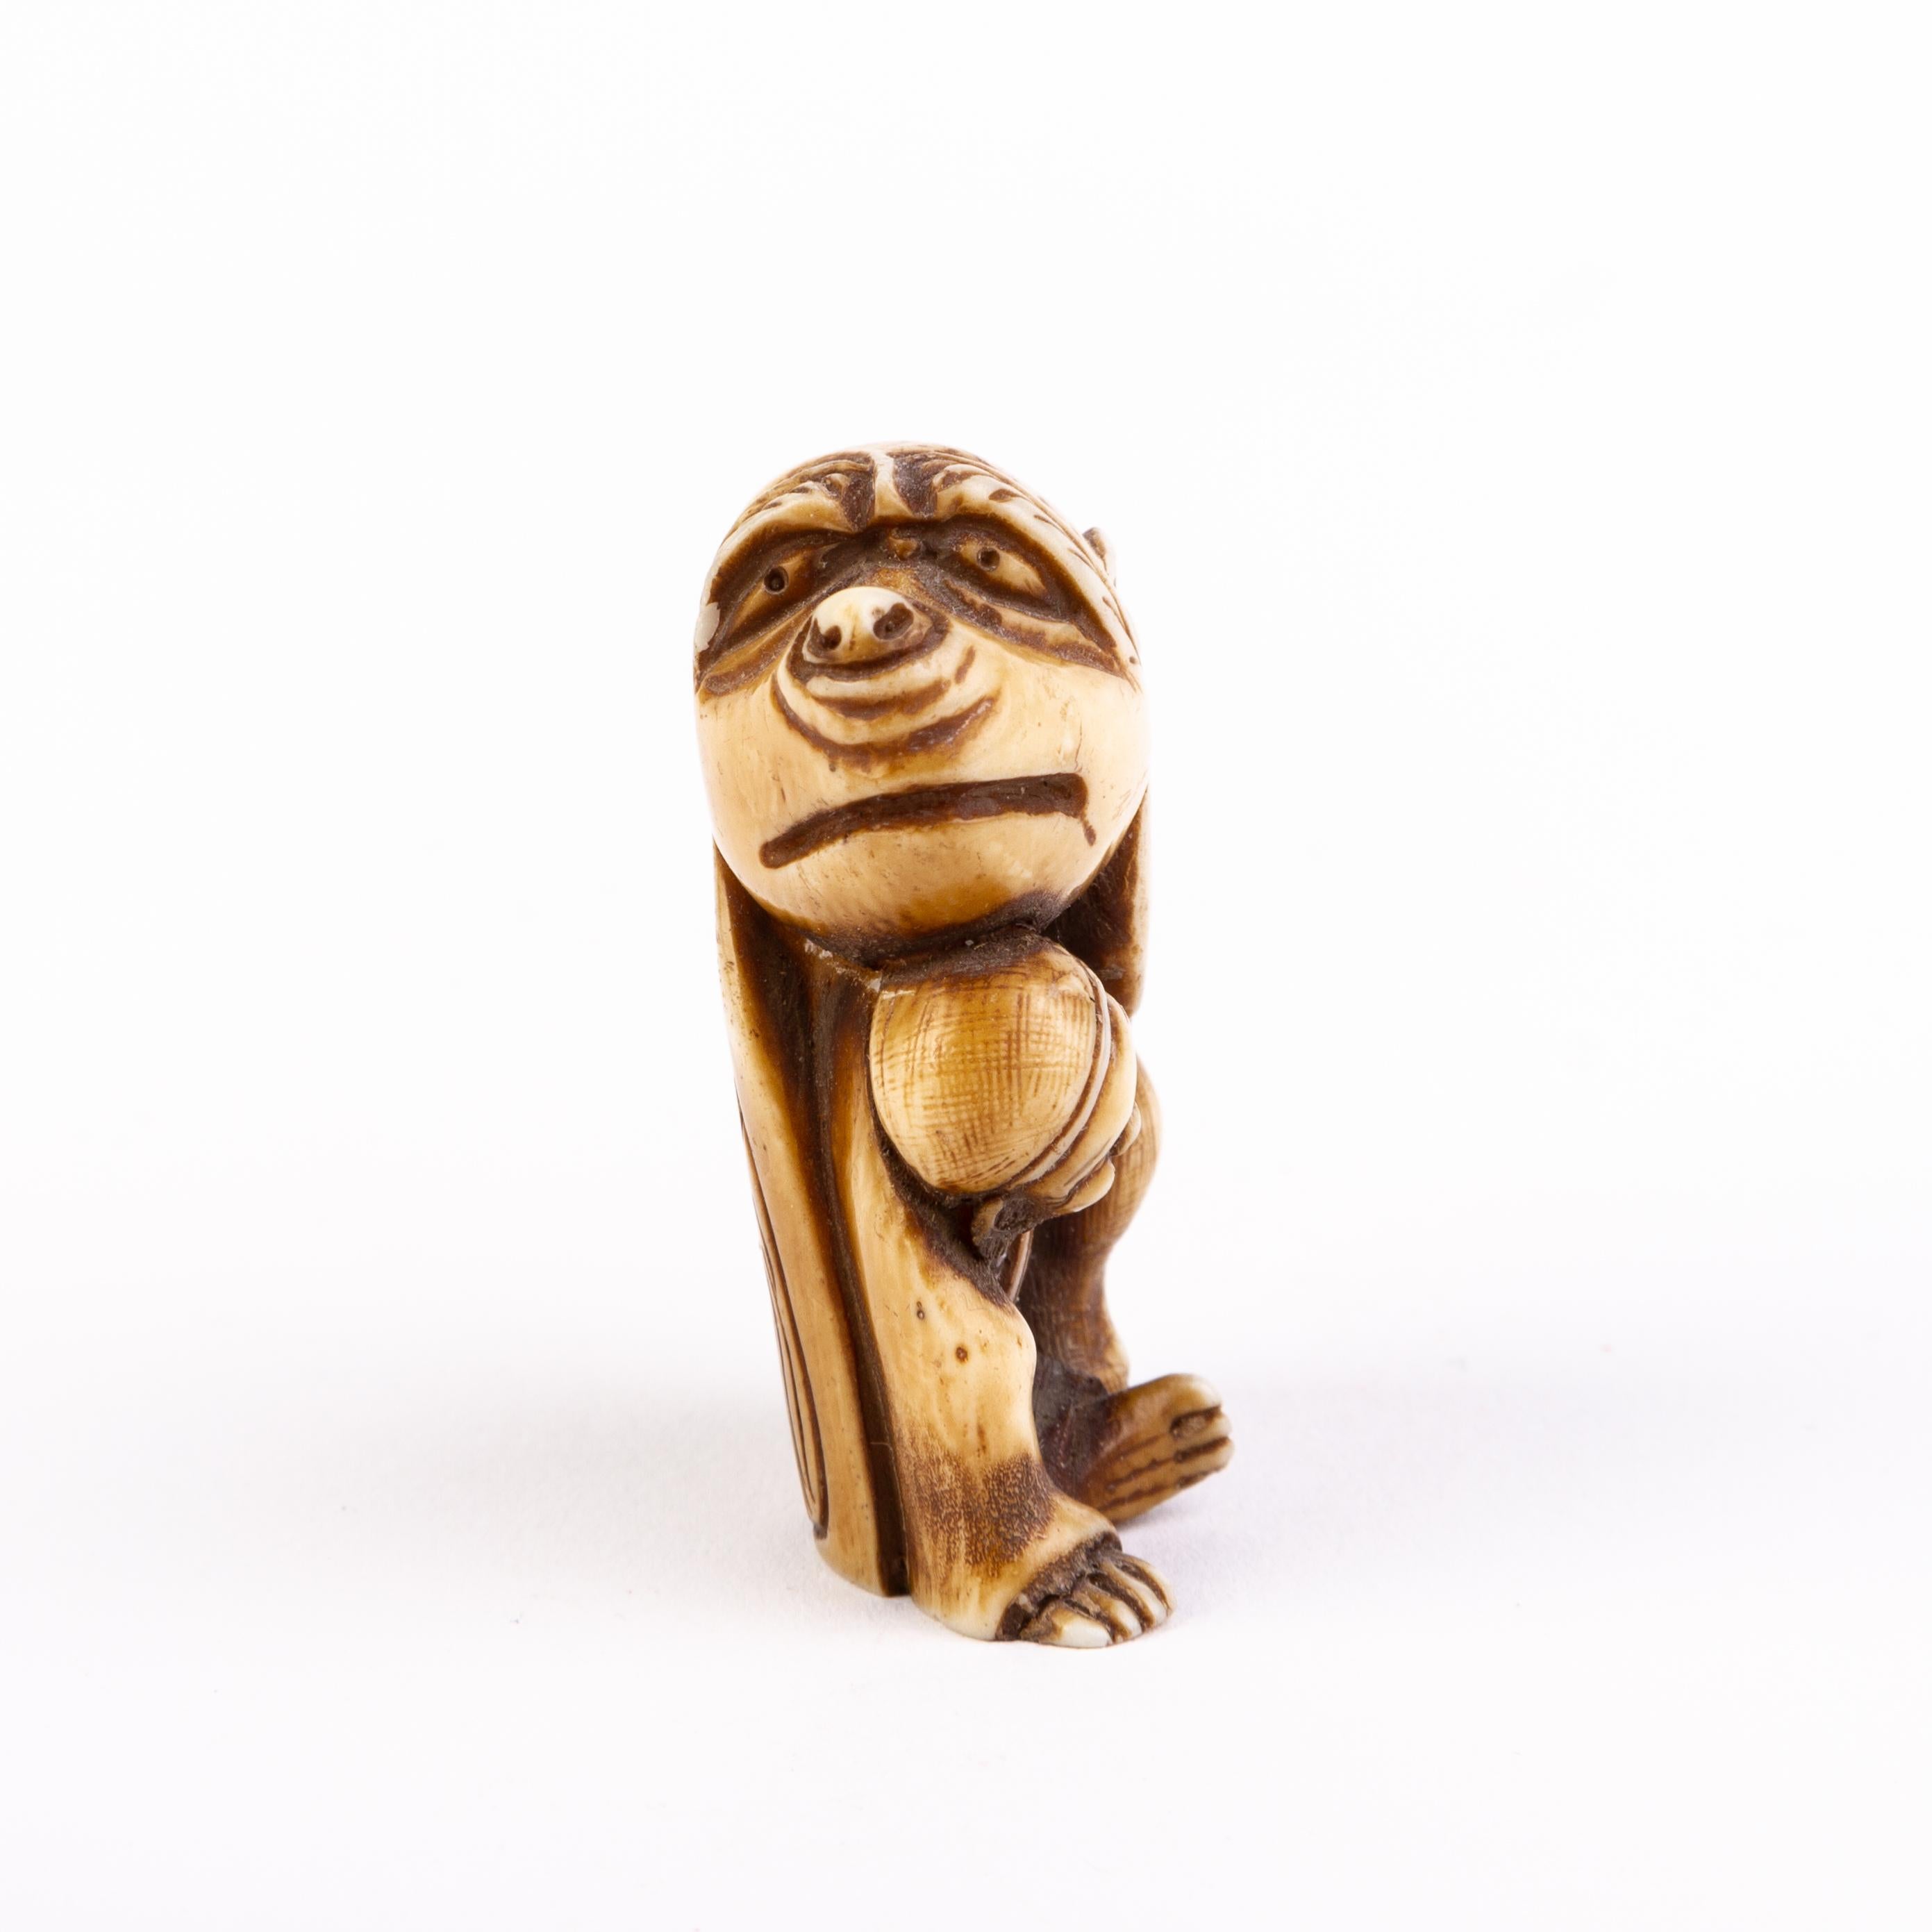 In good condition
From a private collection
Free international shipping
Japanese Boxwood Netsuke of Man Disguised as a Tiger